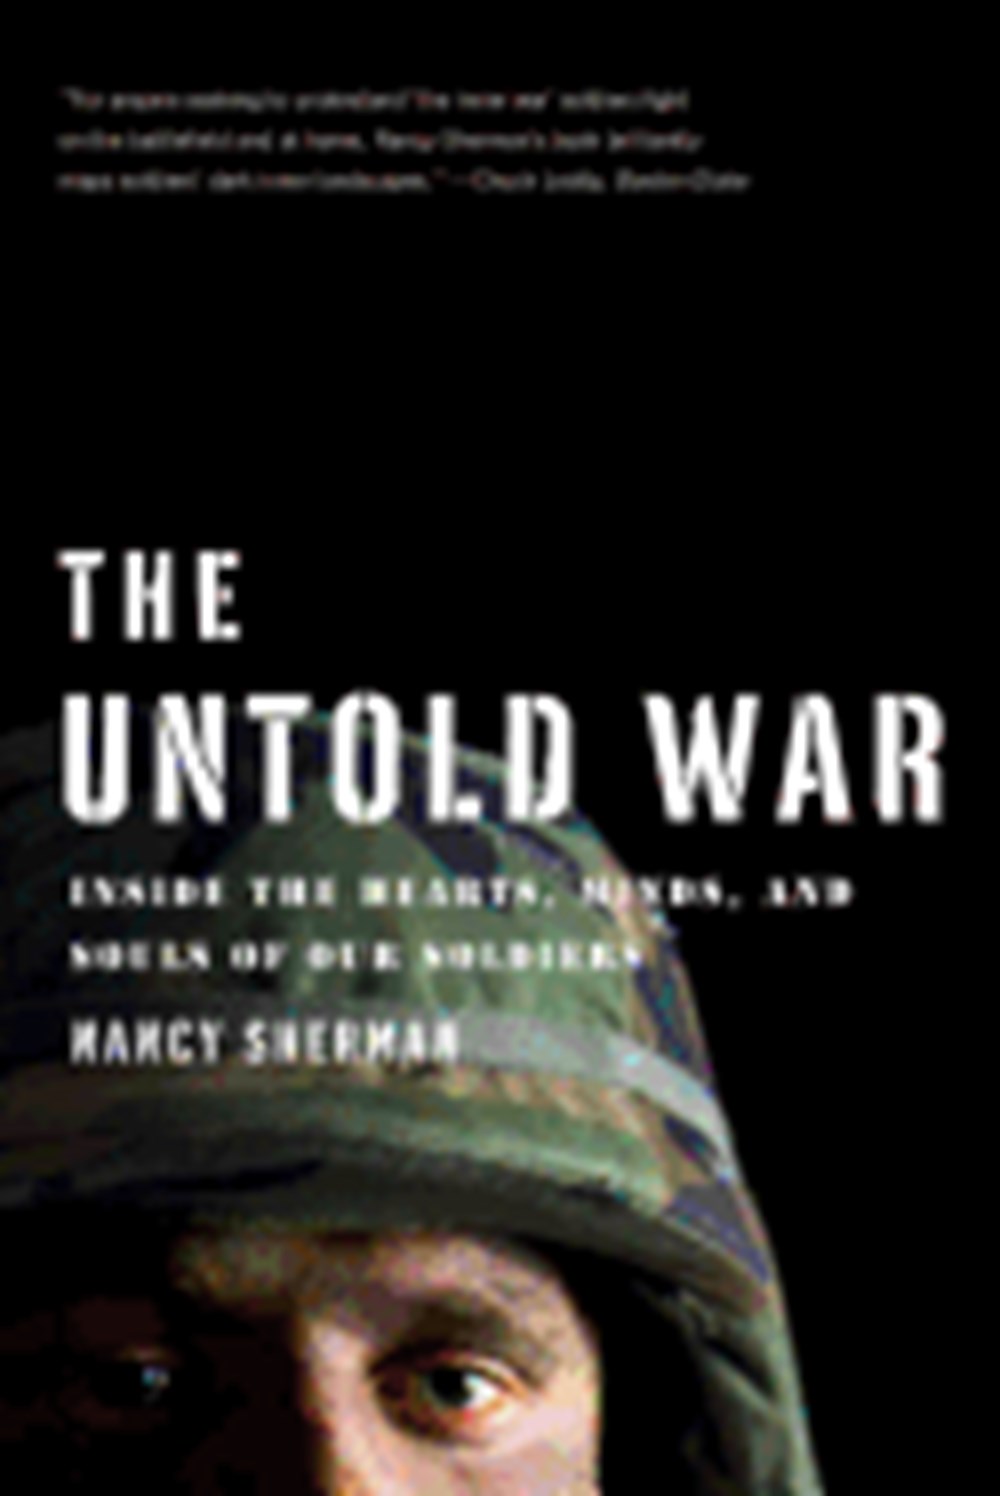 Untold War: Inside the Hearts, Minds, and Souls of Our Soldiers